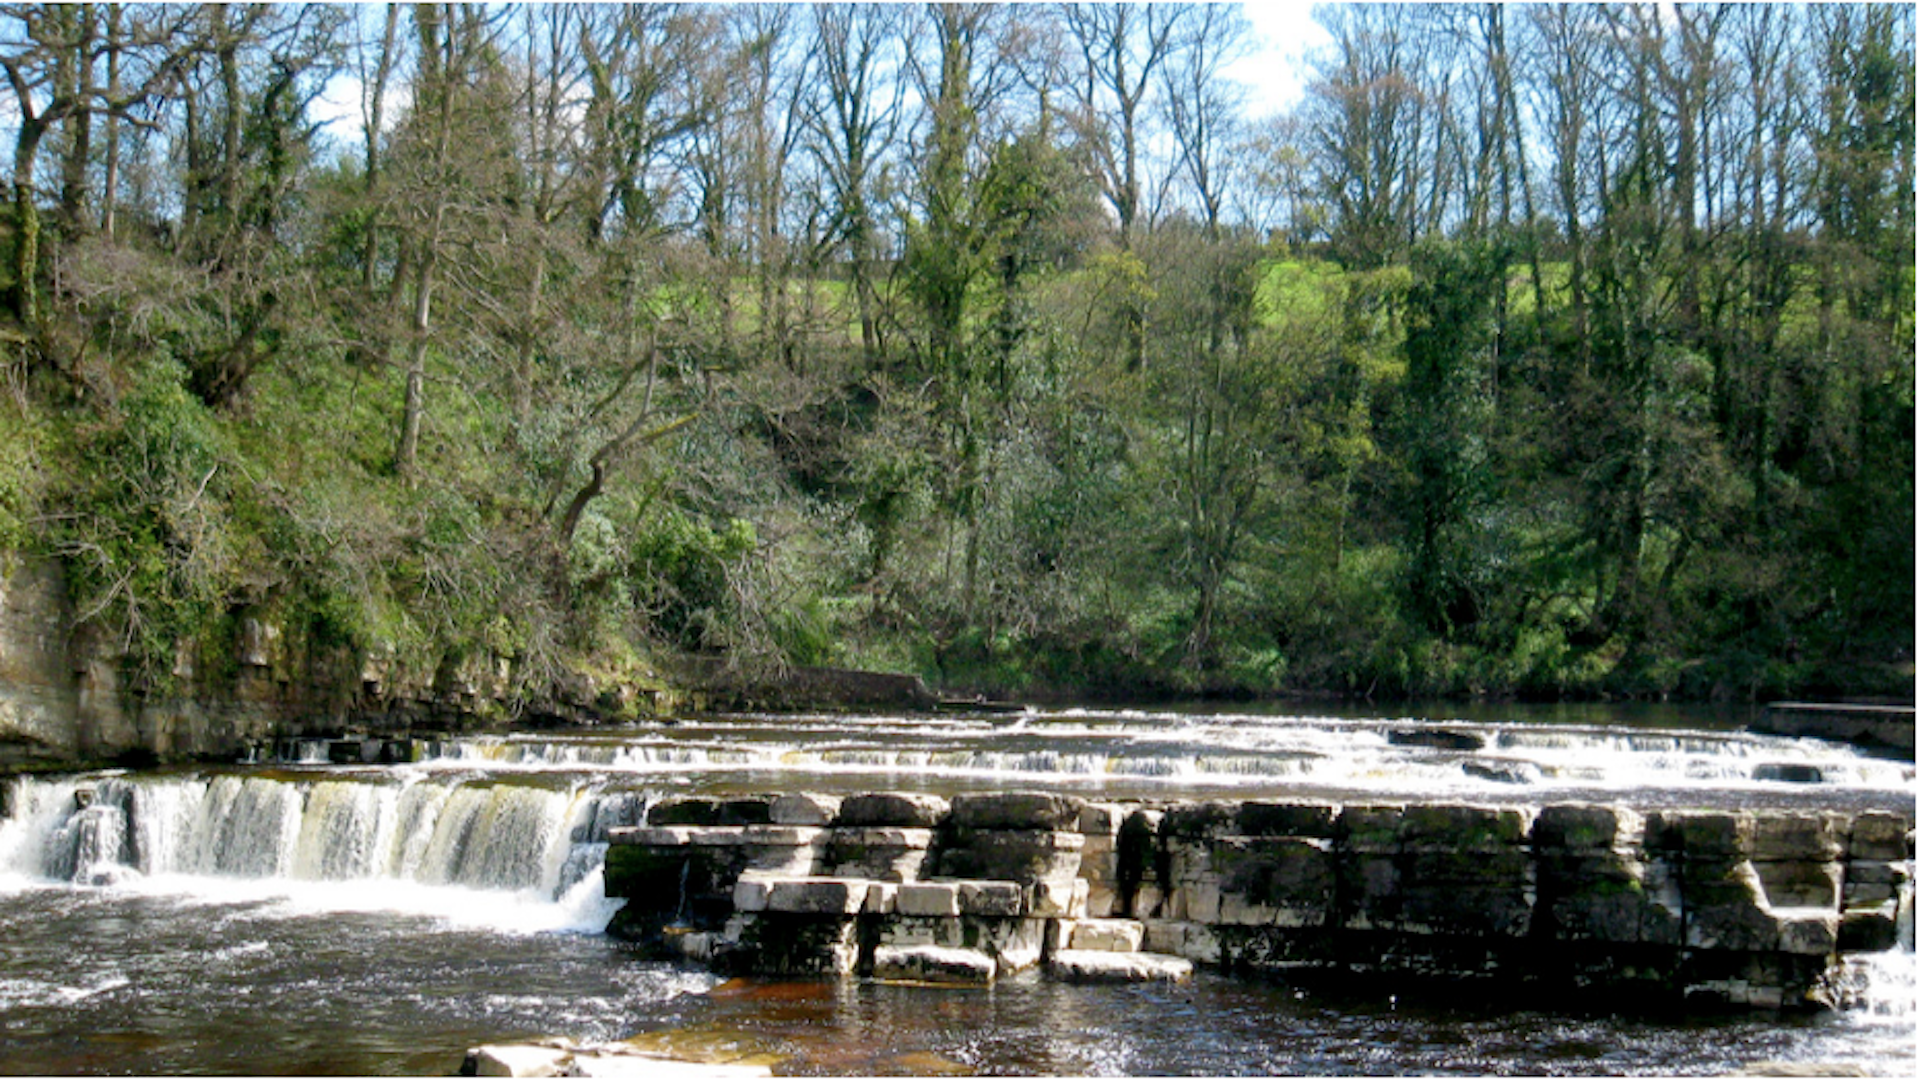 Aysgarth Falls. Water plunges over a rock ledge in a wide tree-lined river in the Yorkshire Dales